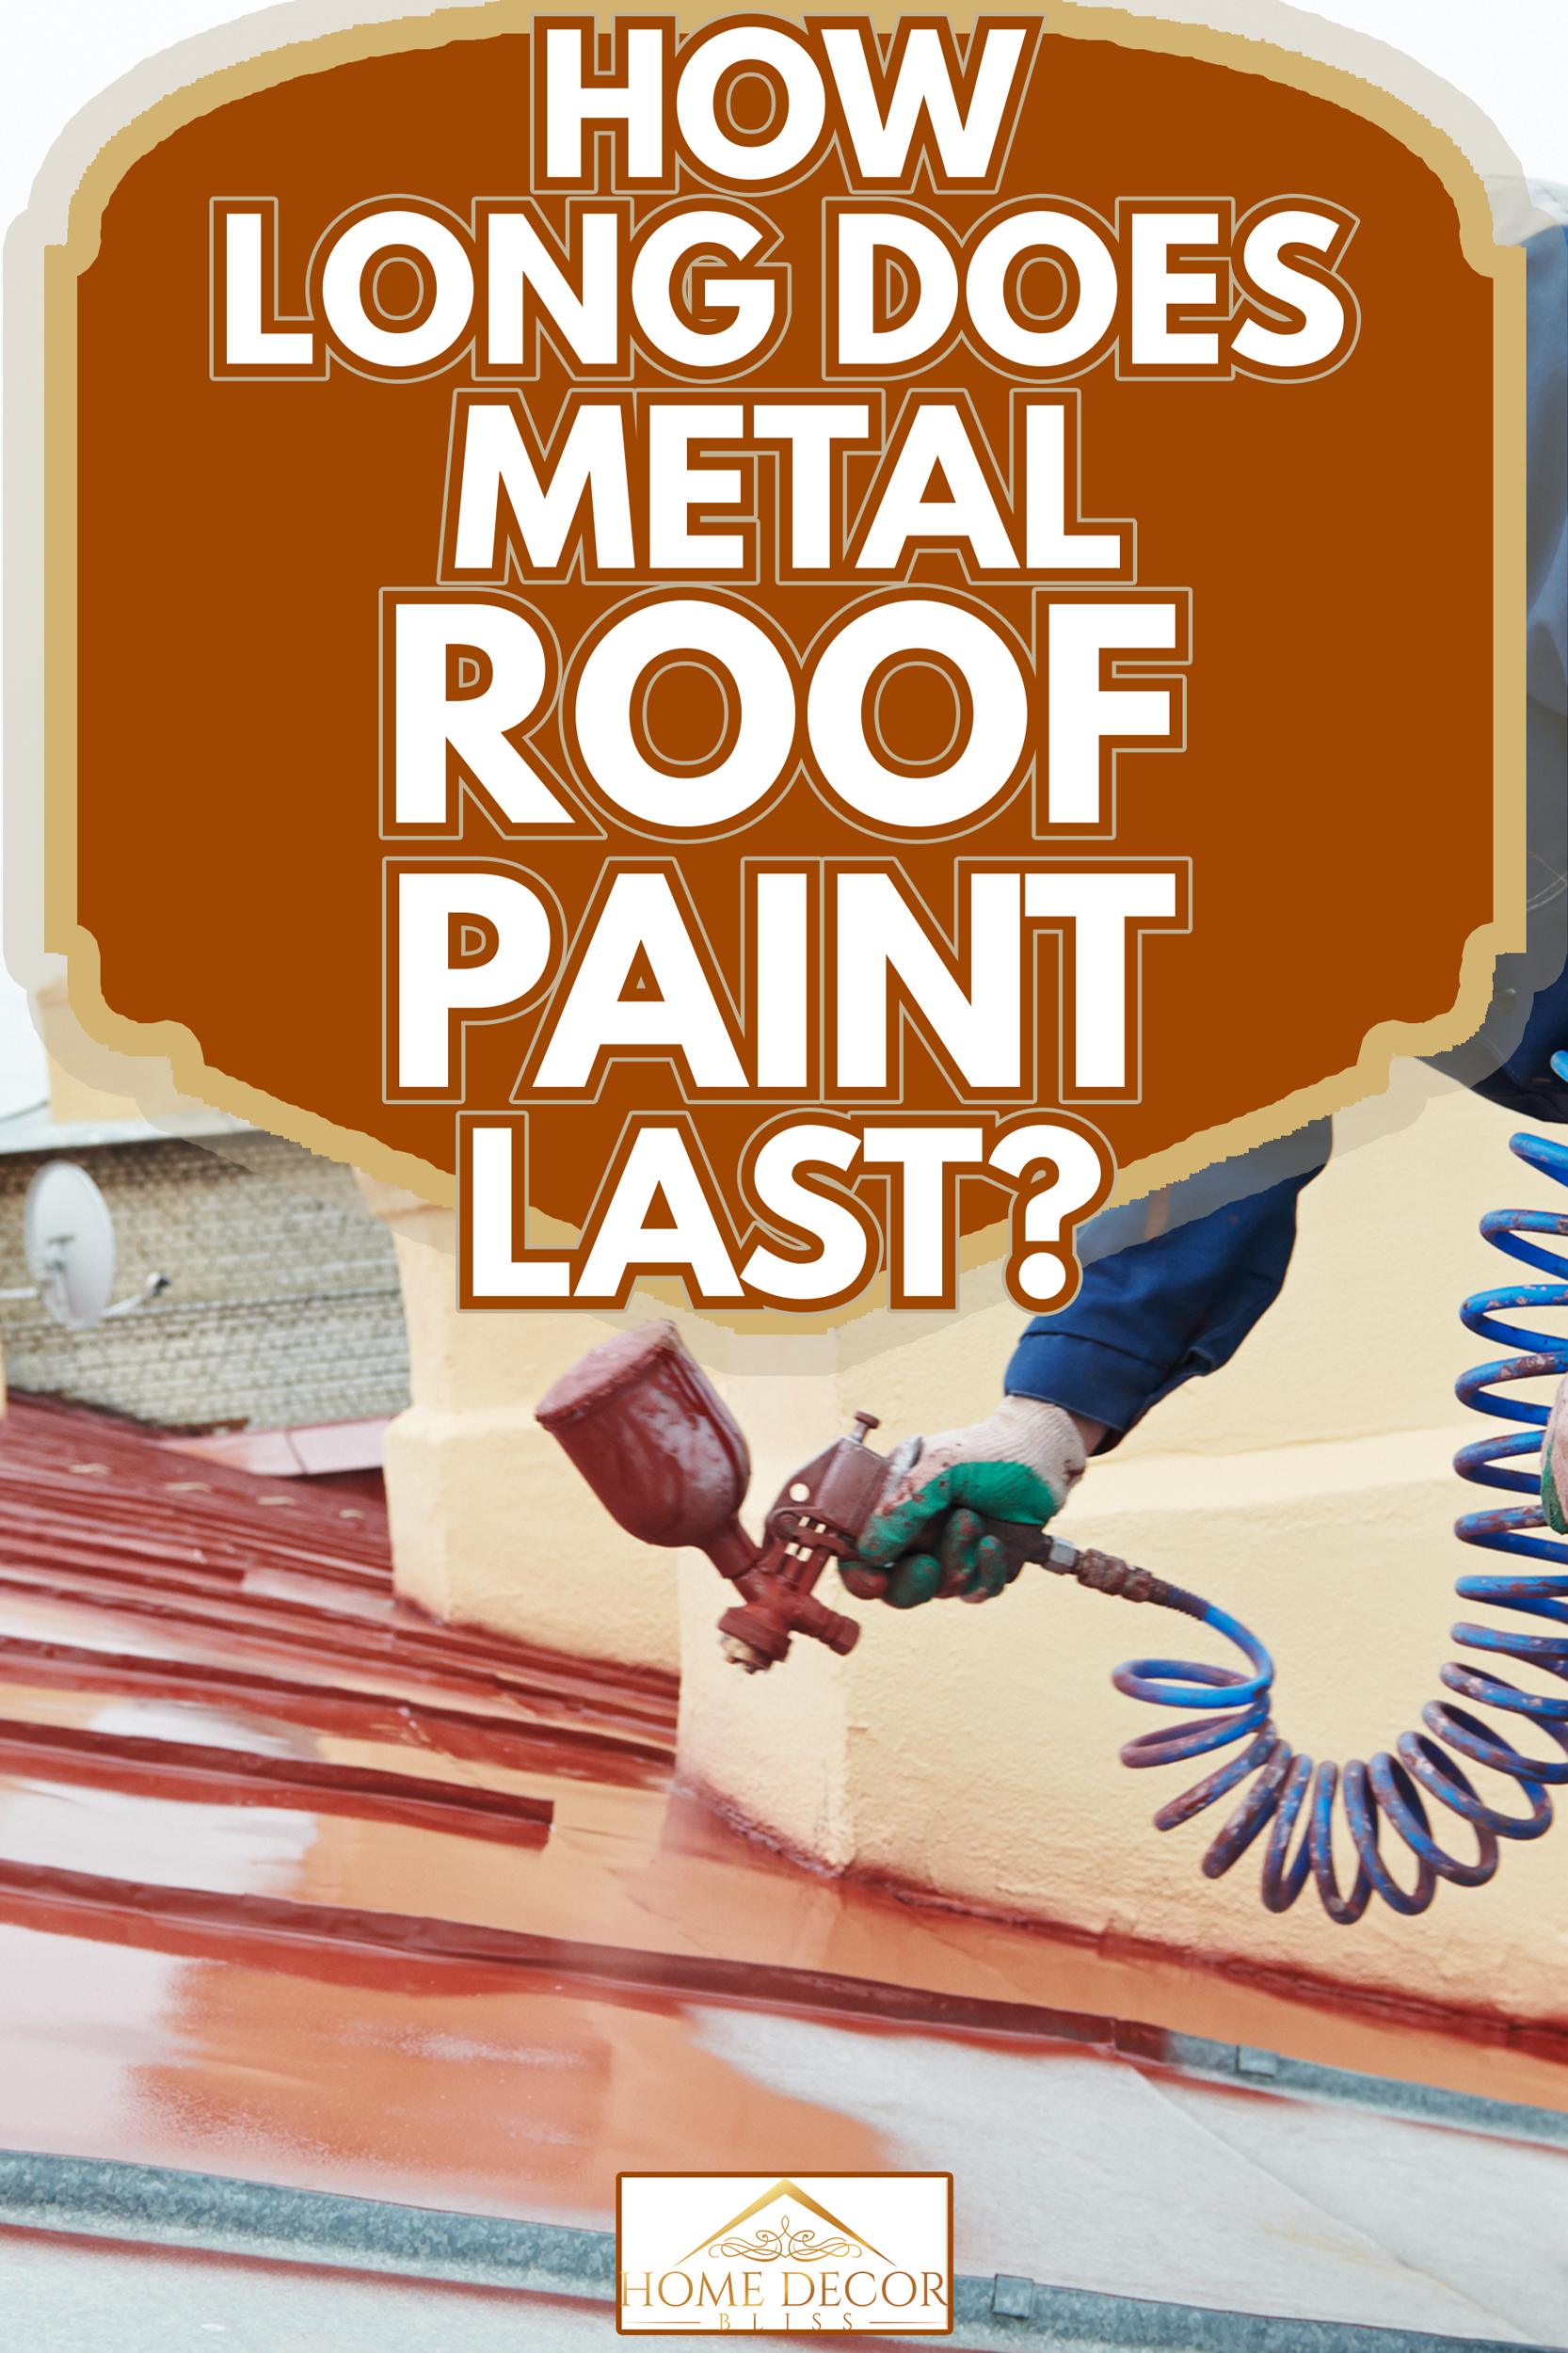 roofer builder worker with pulverizer spraying paint on metal sheet roof - How Long Does Metal Roof Paint Last